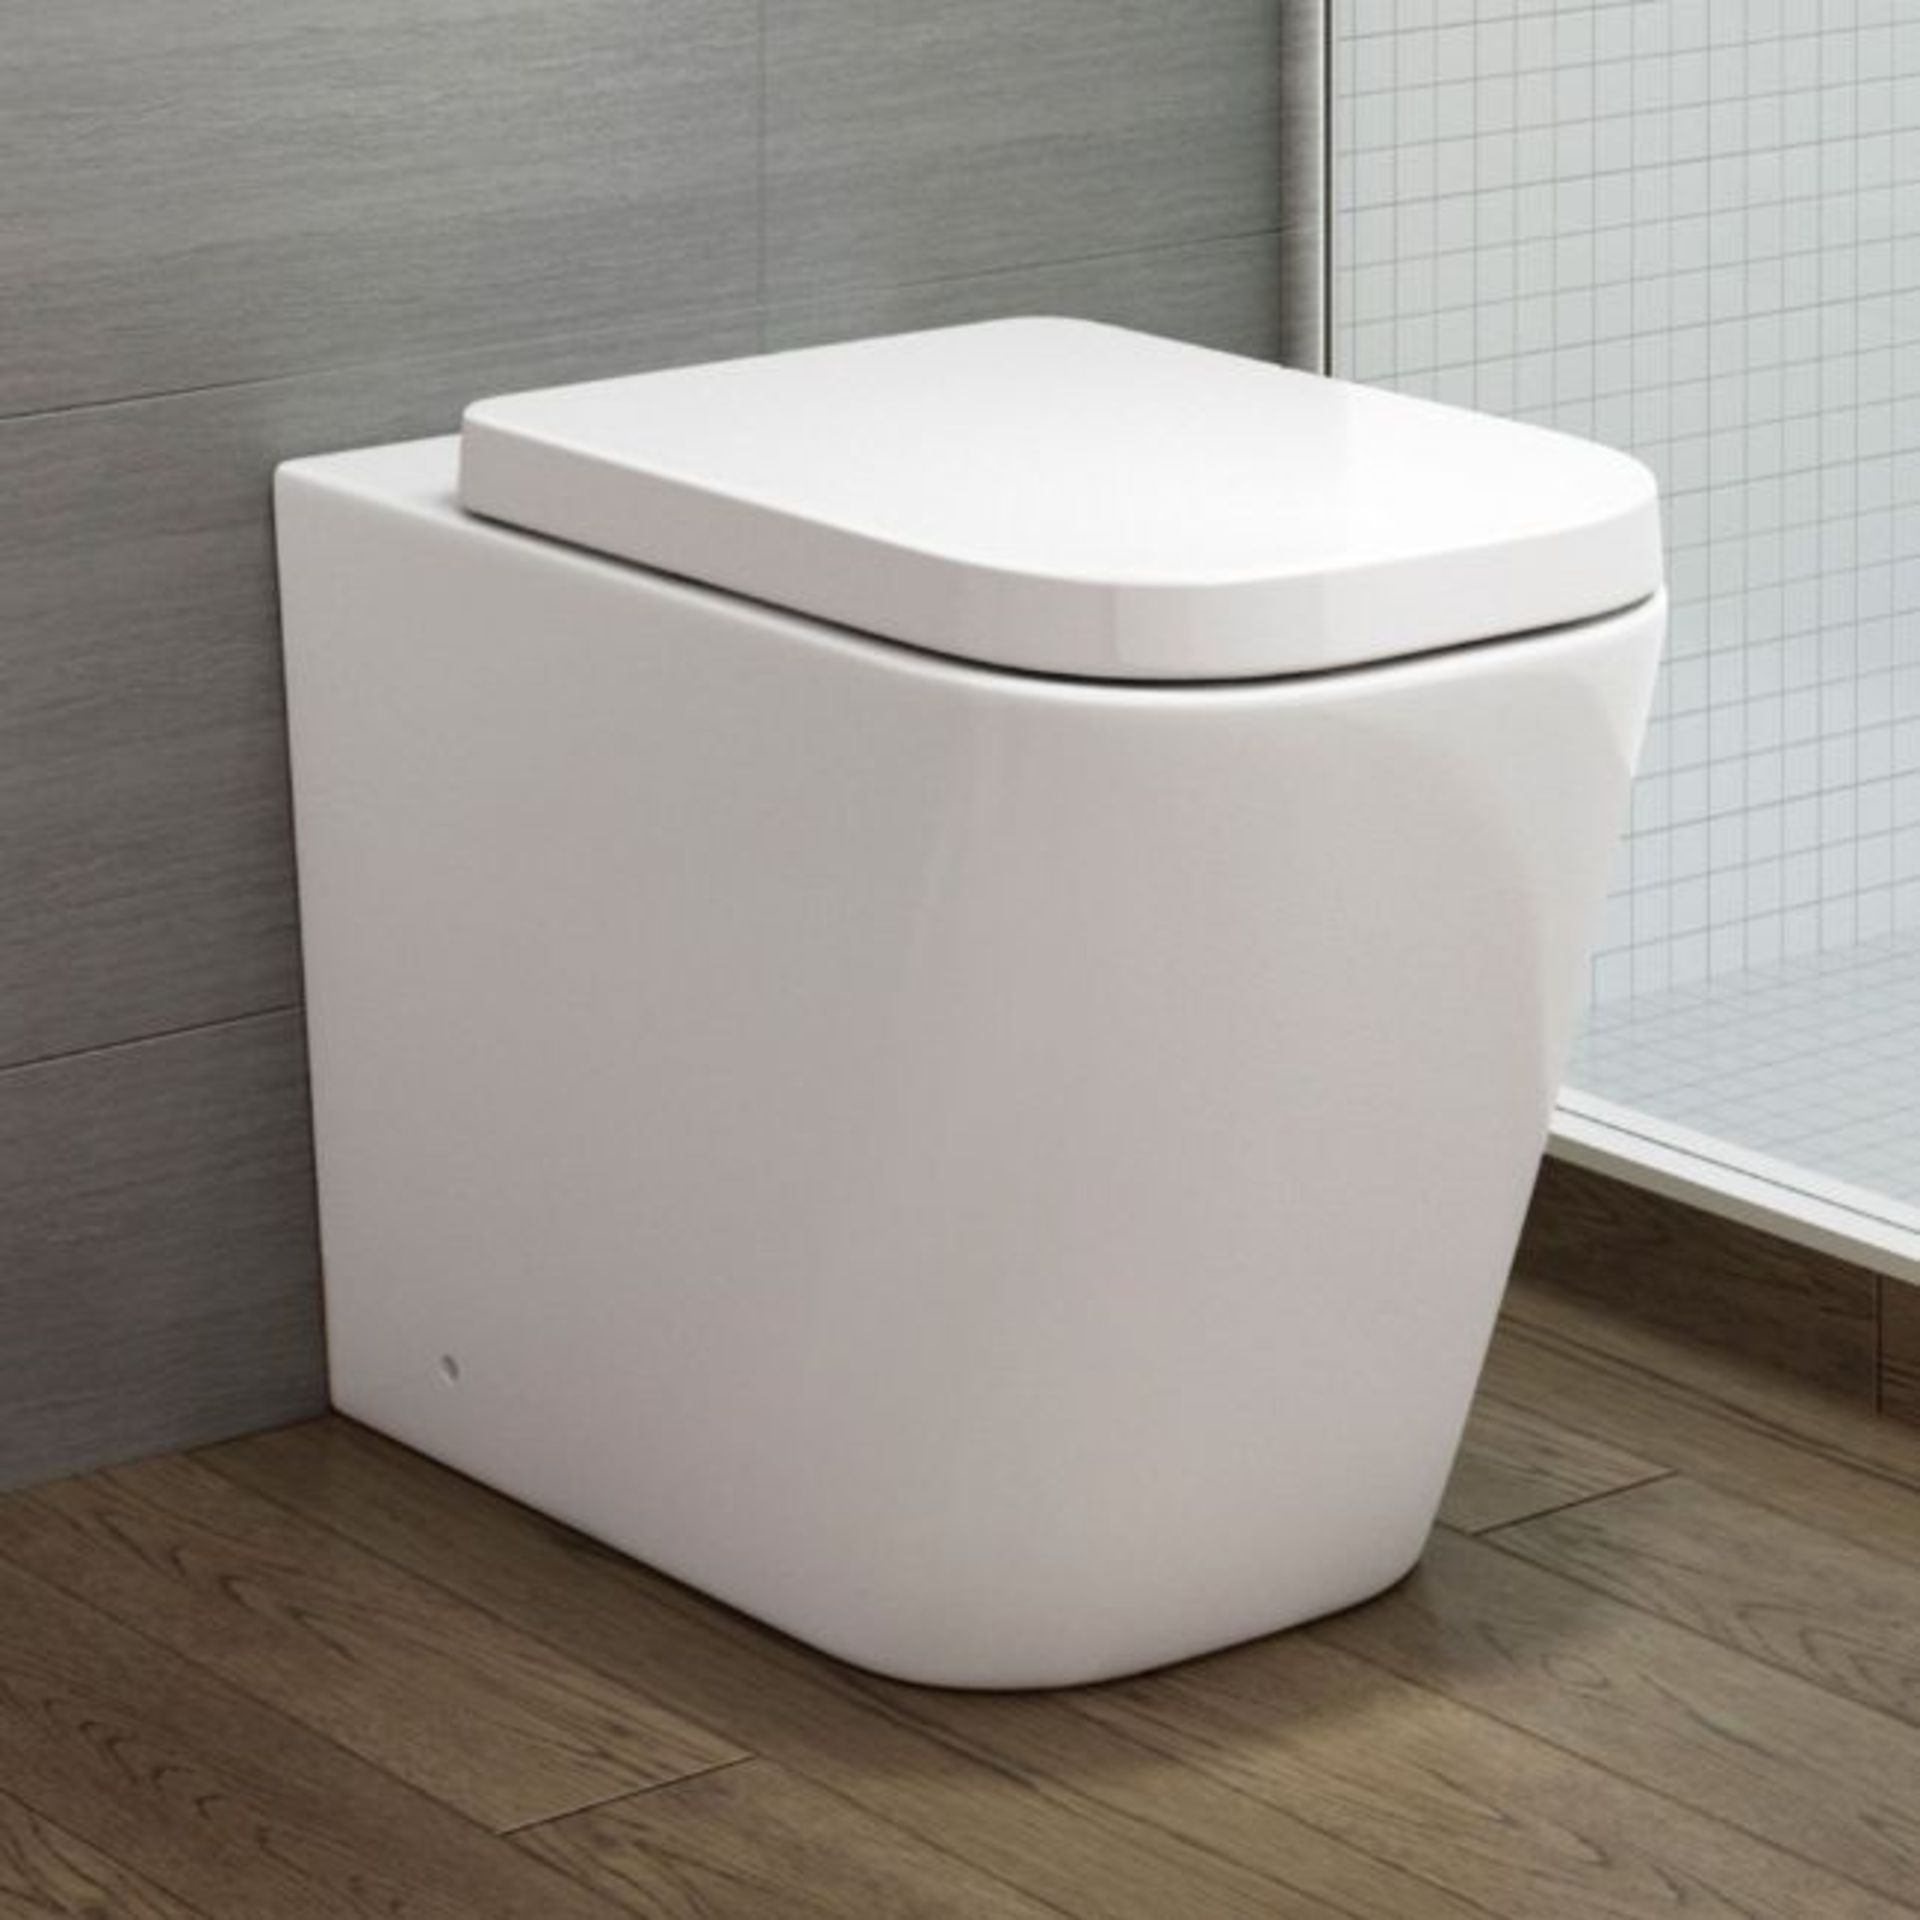 New & Boxed Florence Rimless Back to Wall Toilet inc' Luxury Soft Close Seat. RRP £349.99 each...